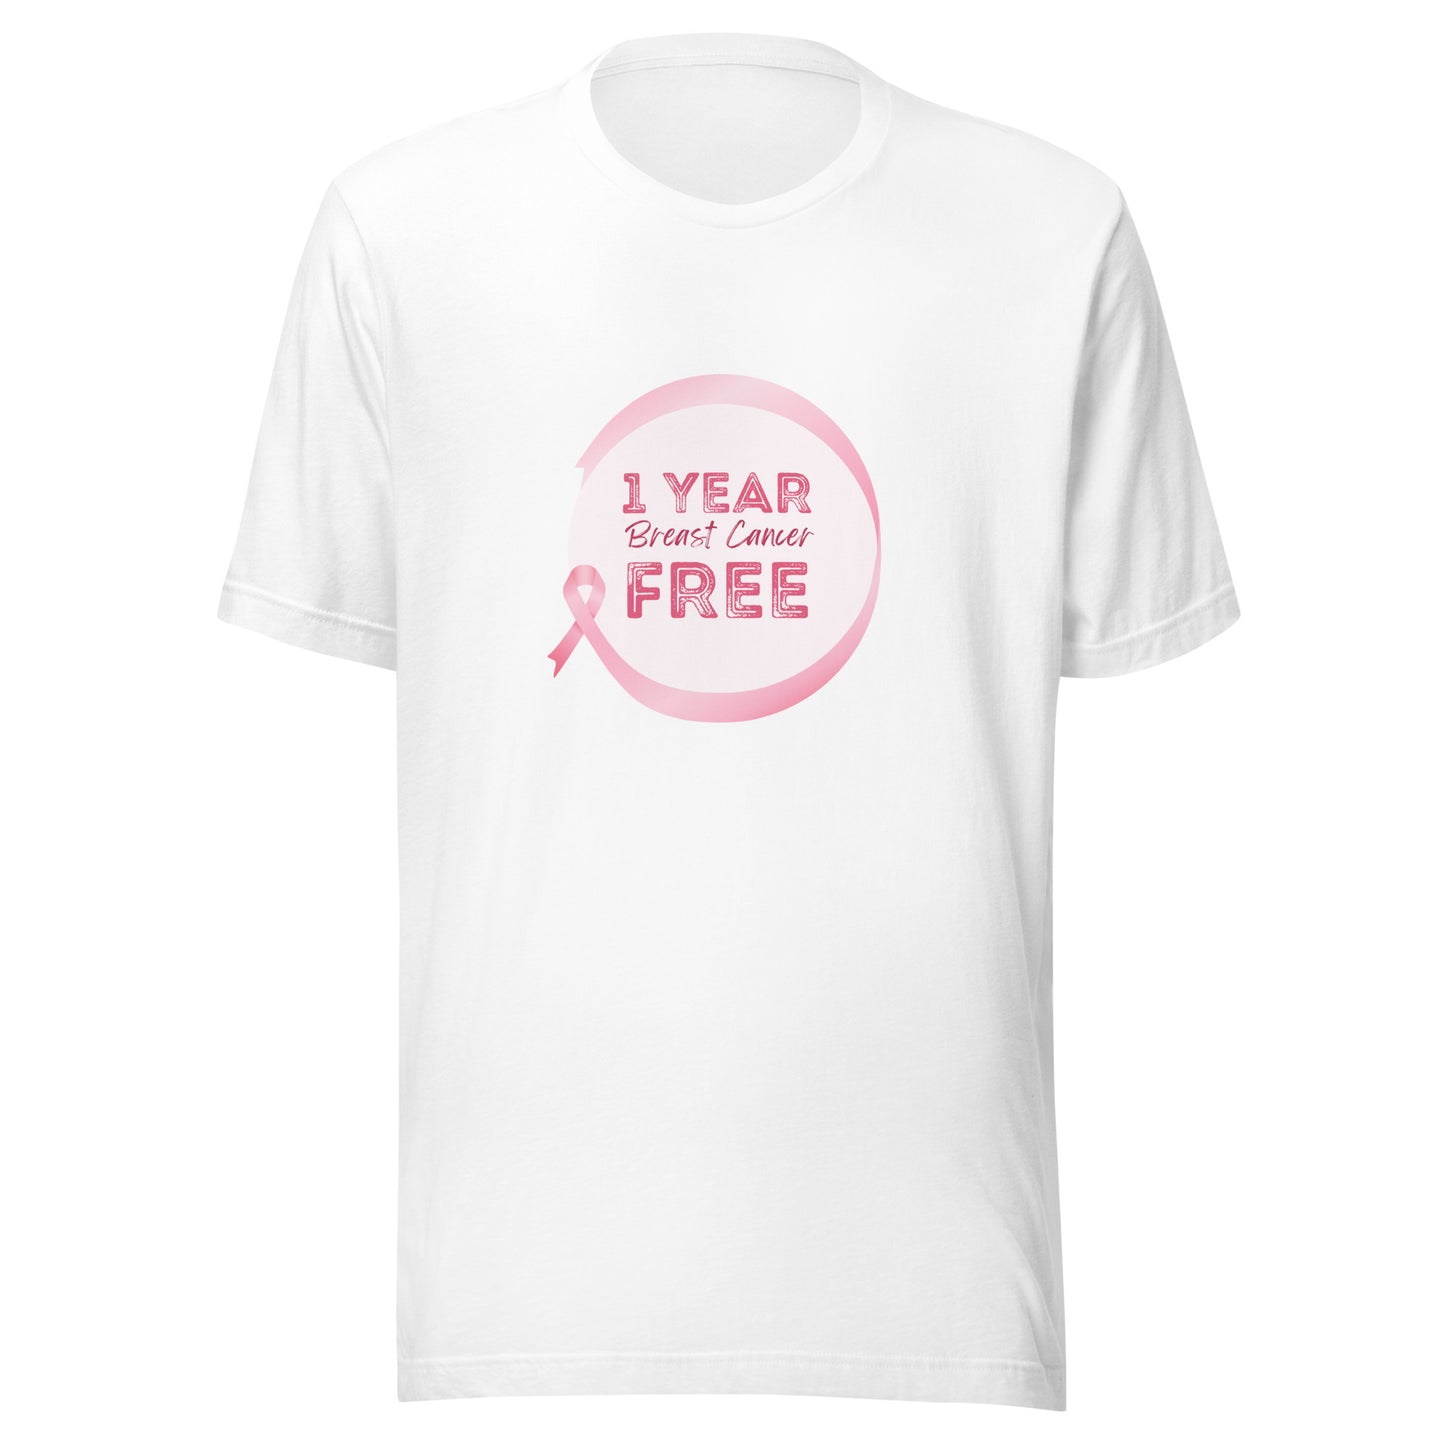 1 Year Breast Cancer Free Anniversary Celebration - Pink Ribbon Graphic Design